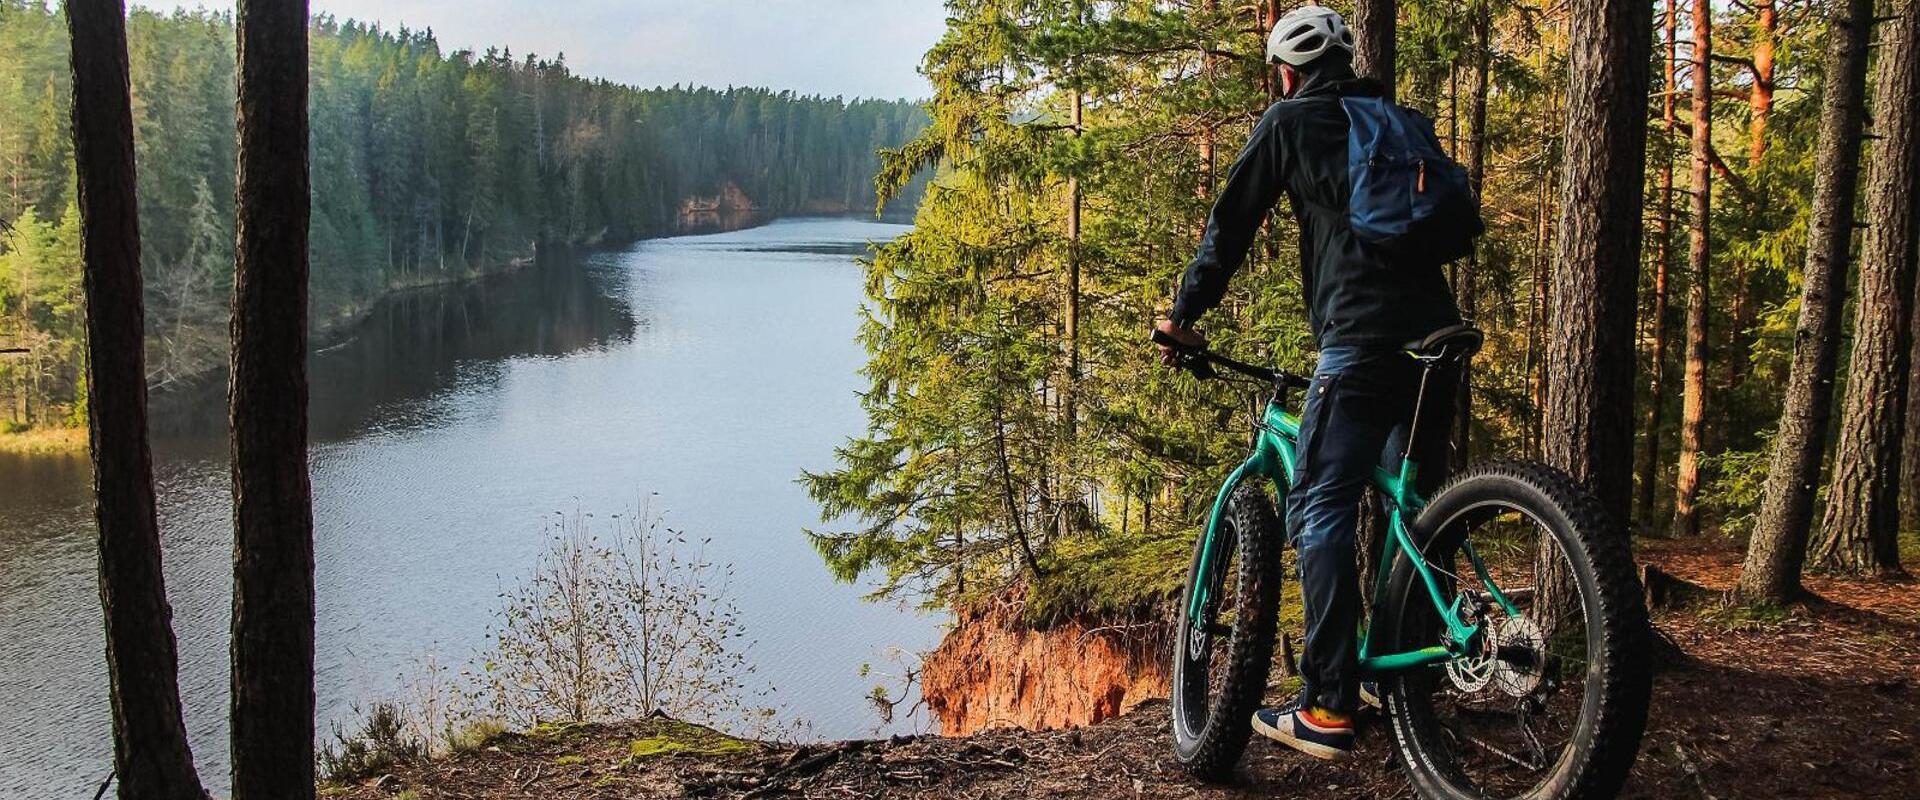 We organise fatbike tours in Taevaskoda all year round! From spring to autumn, we cycle on the forest paths along the banks of the Ahja River valley a